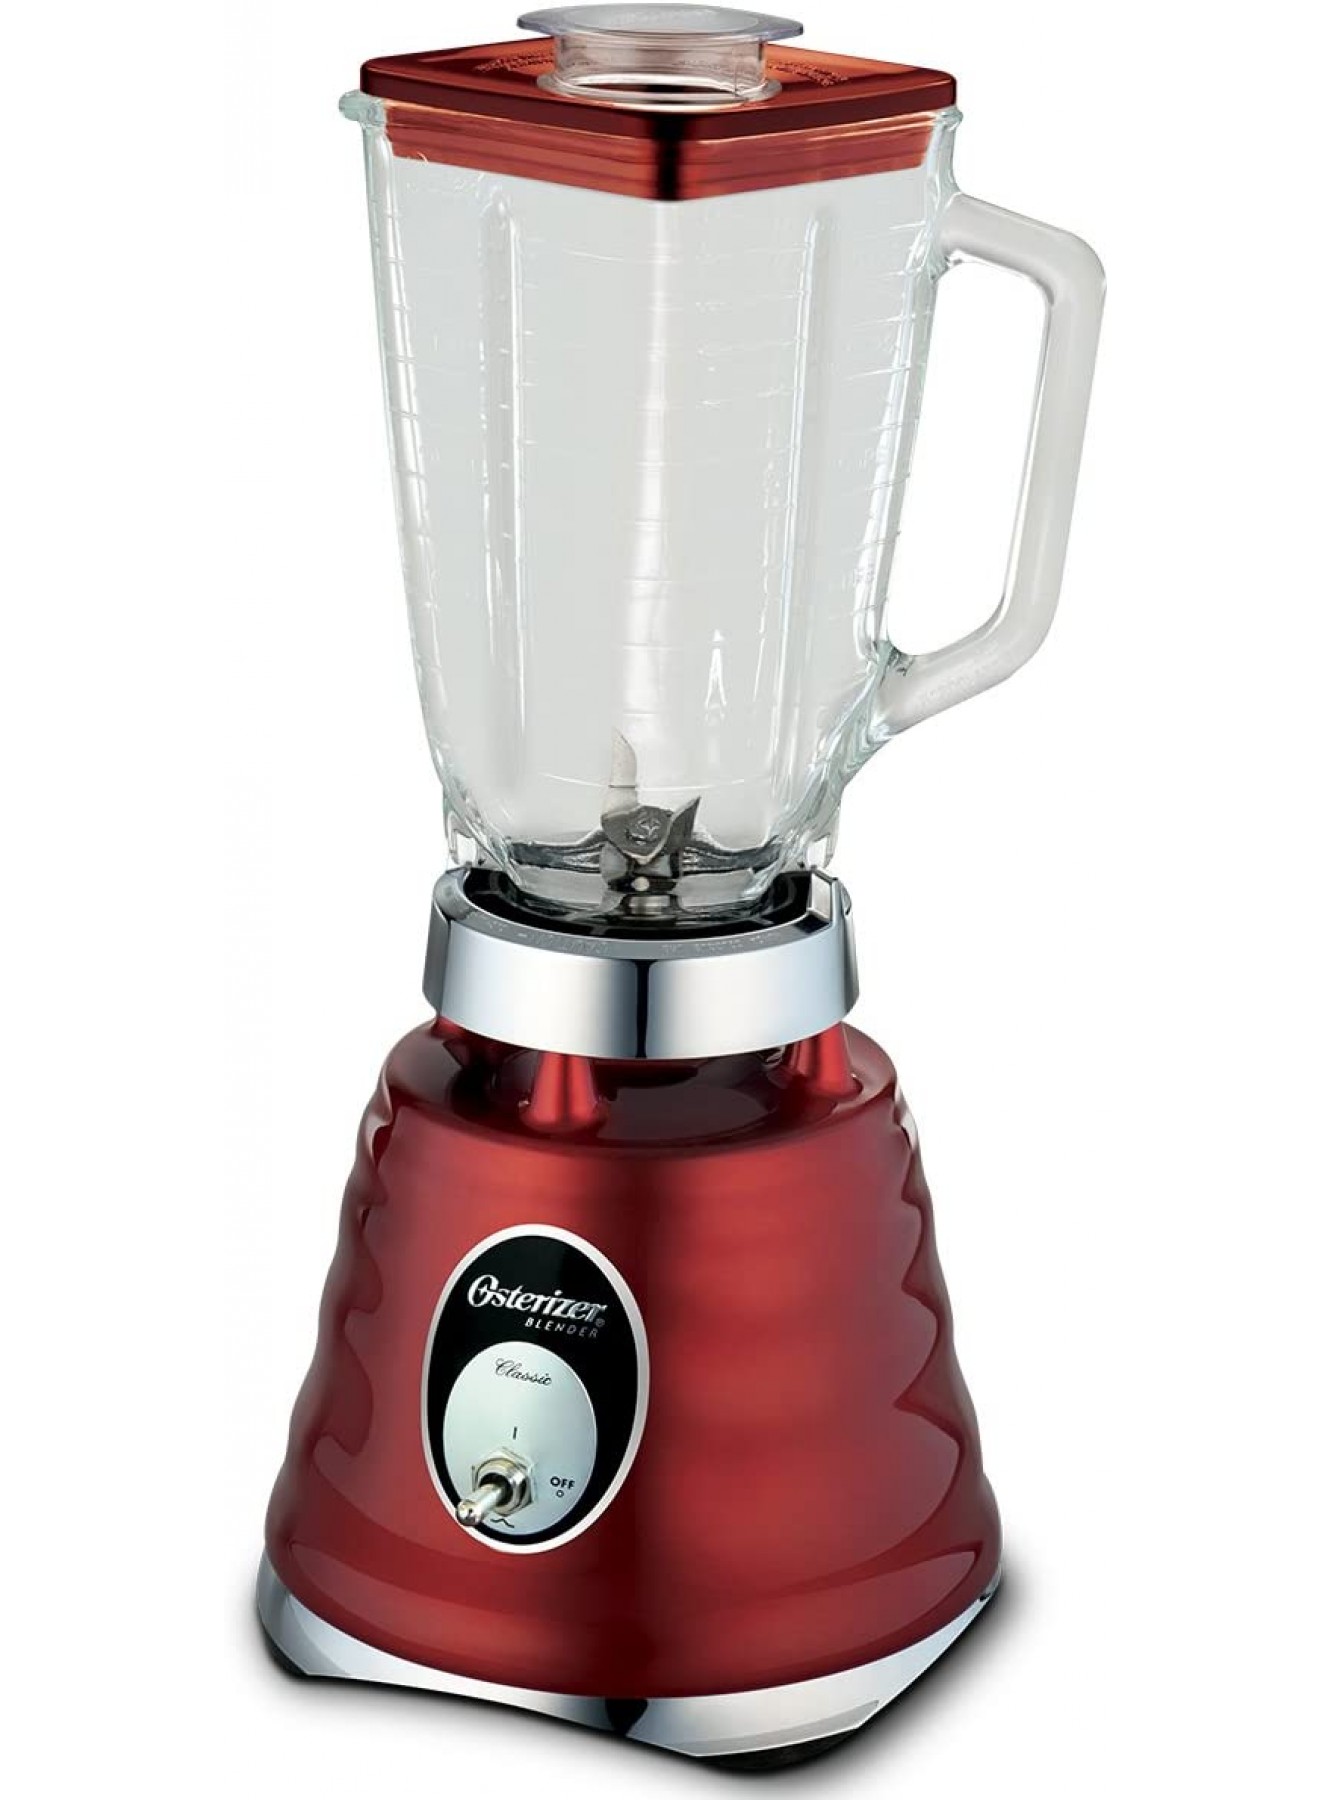 Osterizer 4126 Contemporary Classic Beehive Blender Red B0000AZUWA